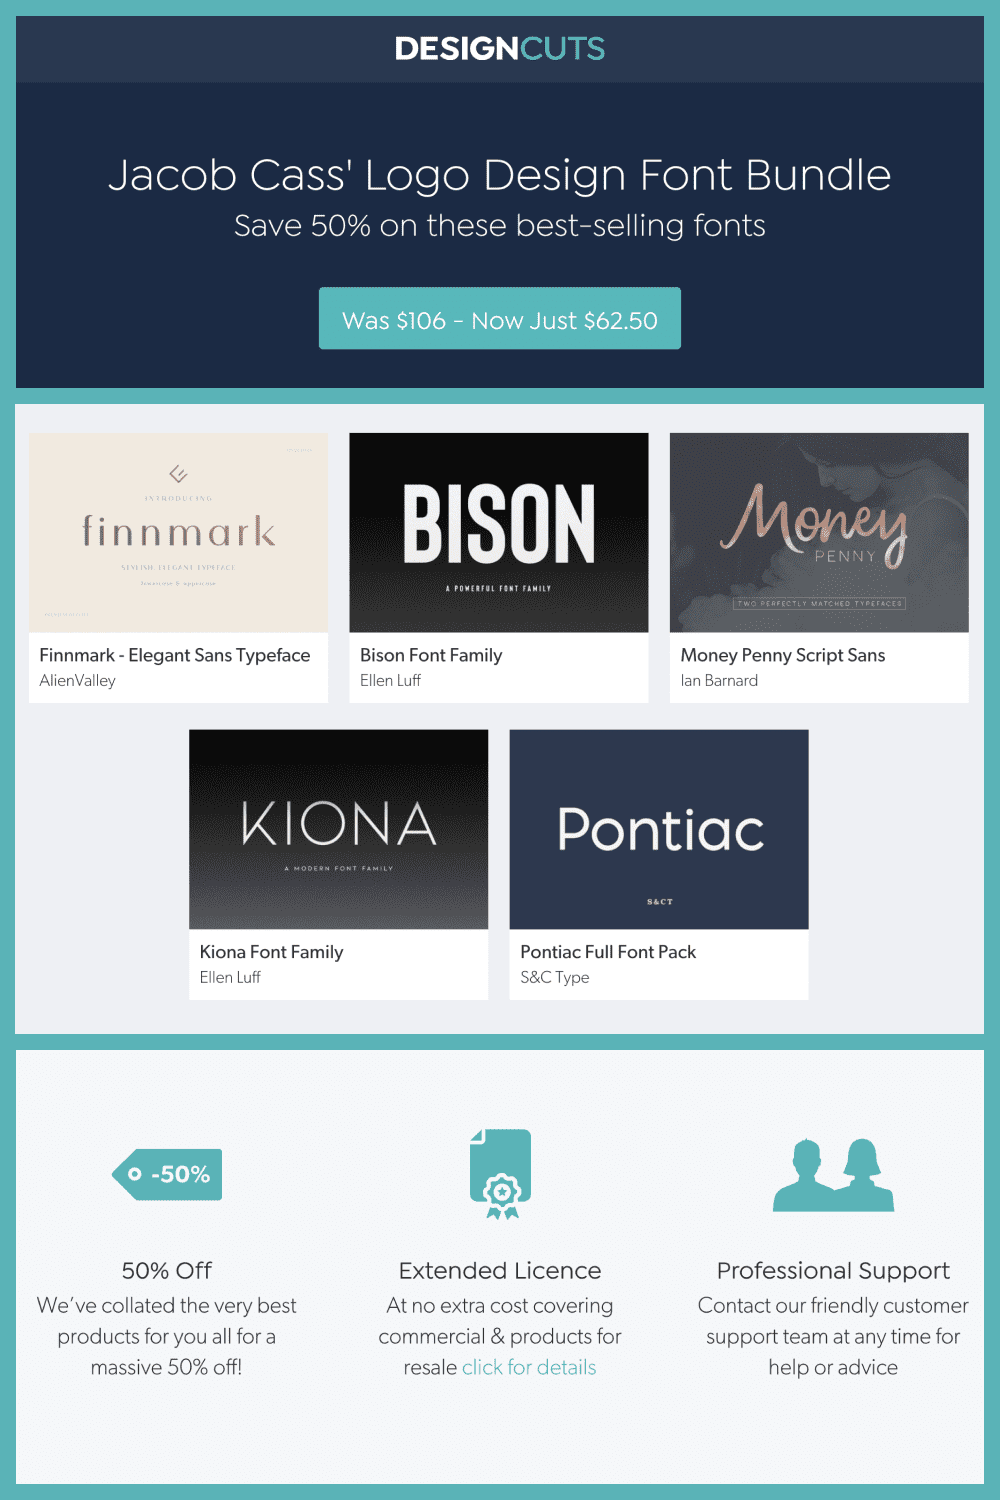 DesignCuts and Jacob Cass Fonts Collection On Sale!.